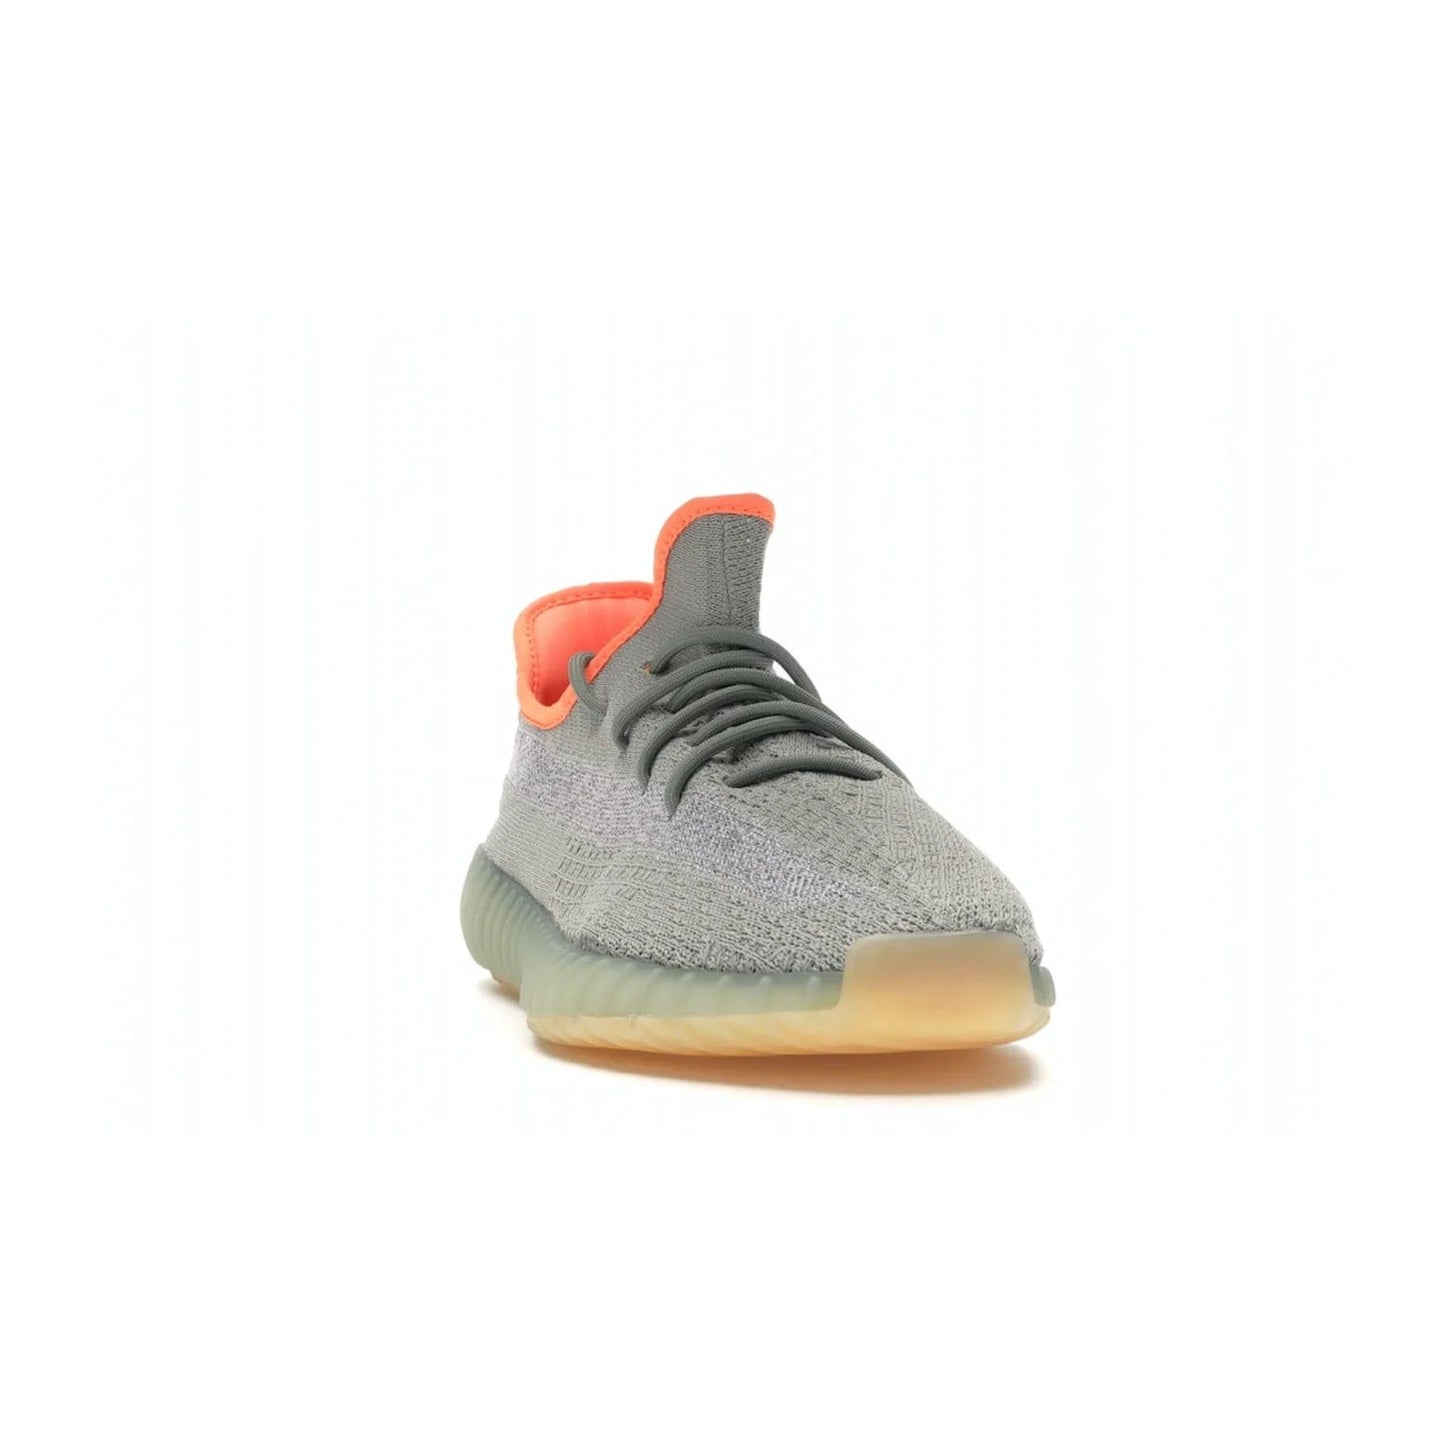 adidas Yeezy Boost 350 V2 Desert Sage - Image 8 - Only at www.BallersClubKickz.com - Upgrade your style with the adidas Yeezy Boost 350 V2 Desert Sage. This 350V2 features a Desert Sage primeknit upper with tonal side stripe, and an orange-highlighted translucent Boost cushioning sole. Stay on-trend in effortless style.